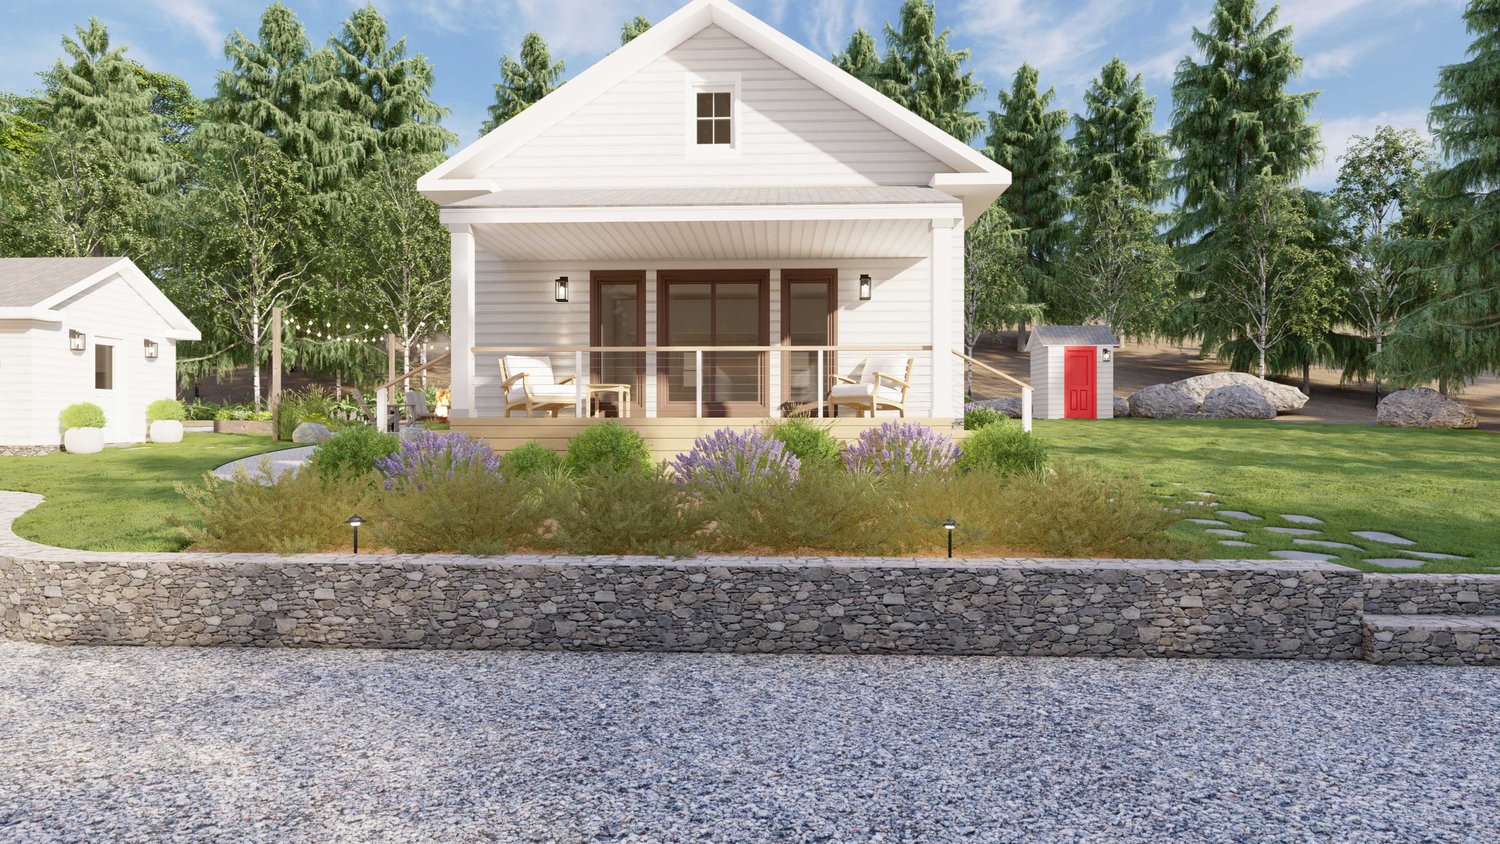 Long Island front yard with gravel flooring, retaining wall, lawn and front porch seating area